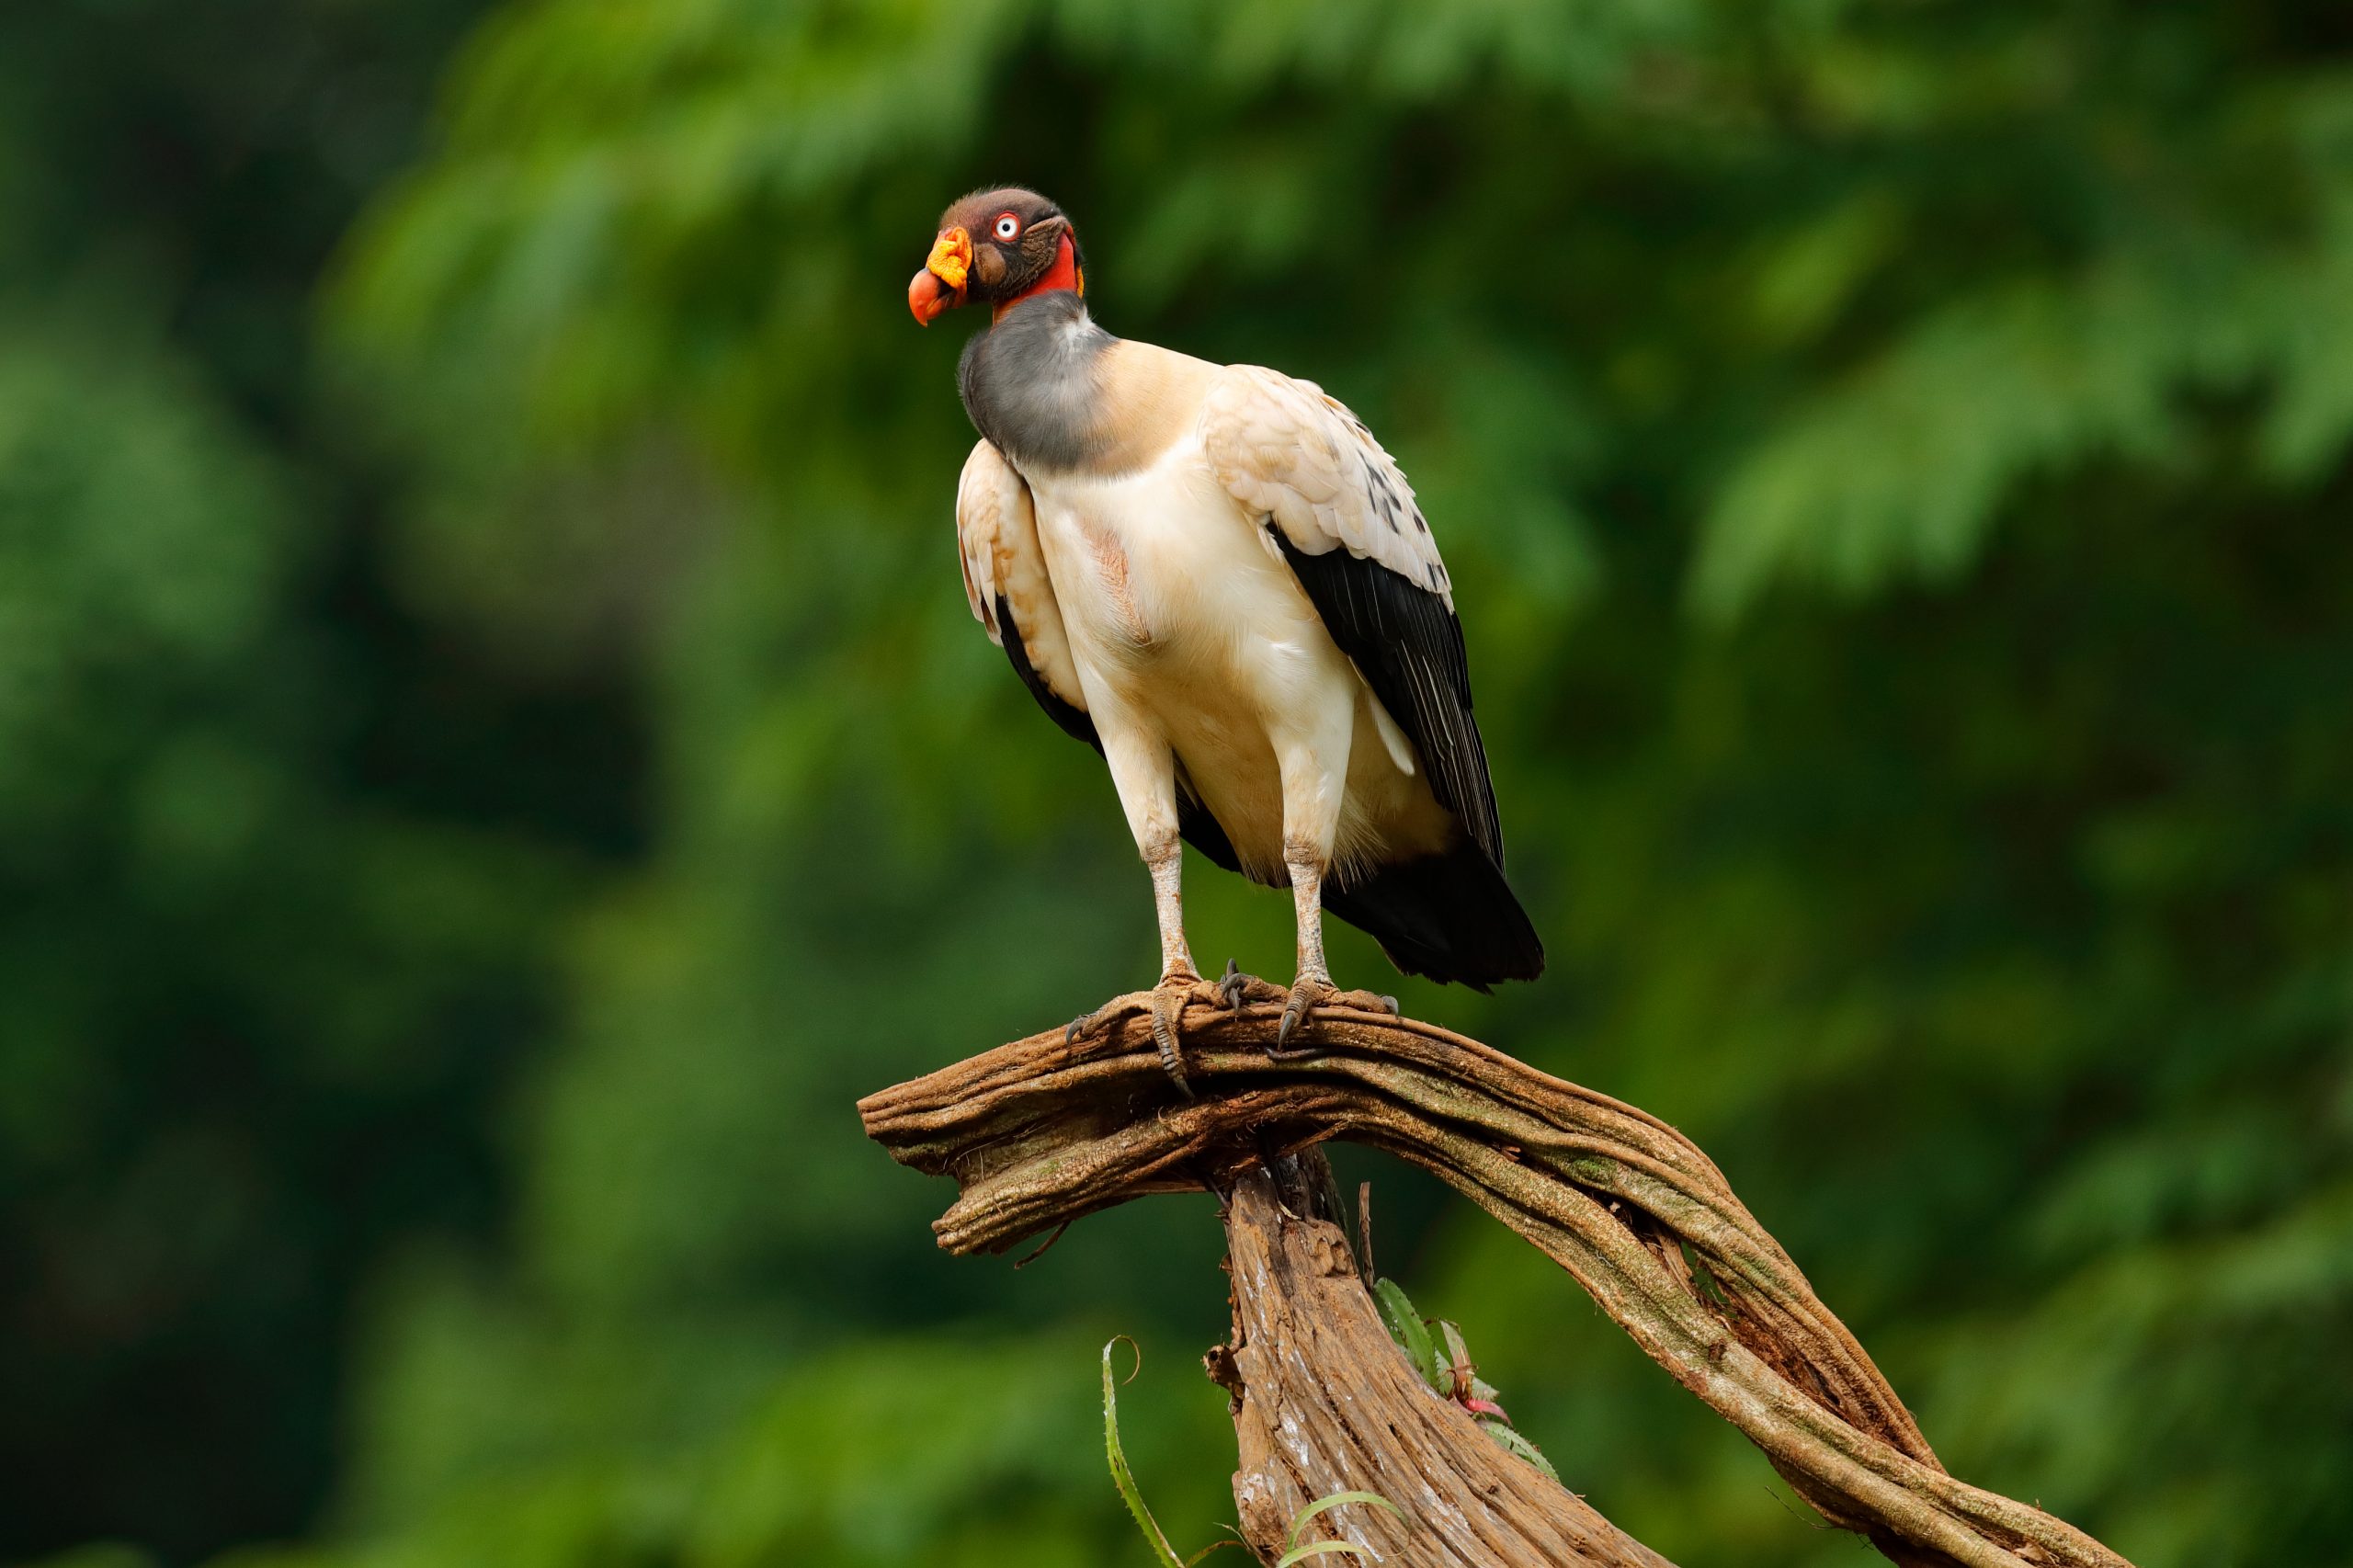 King Vulture perched on a branch